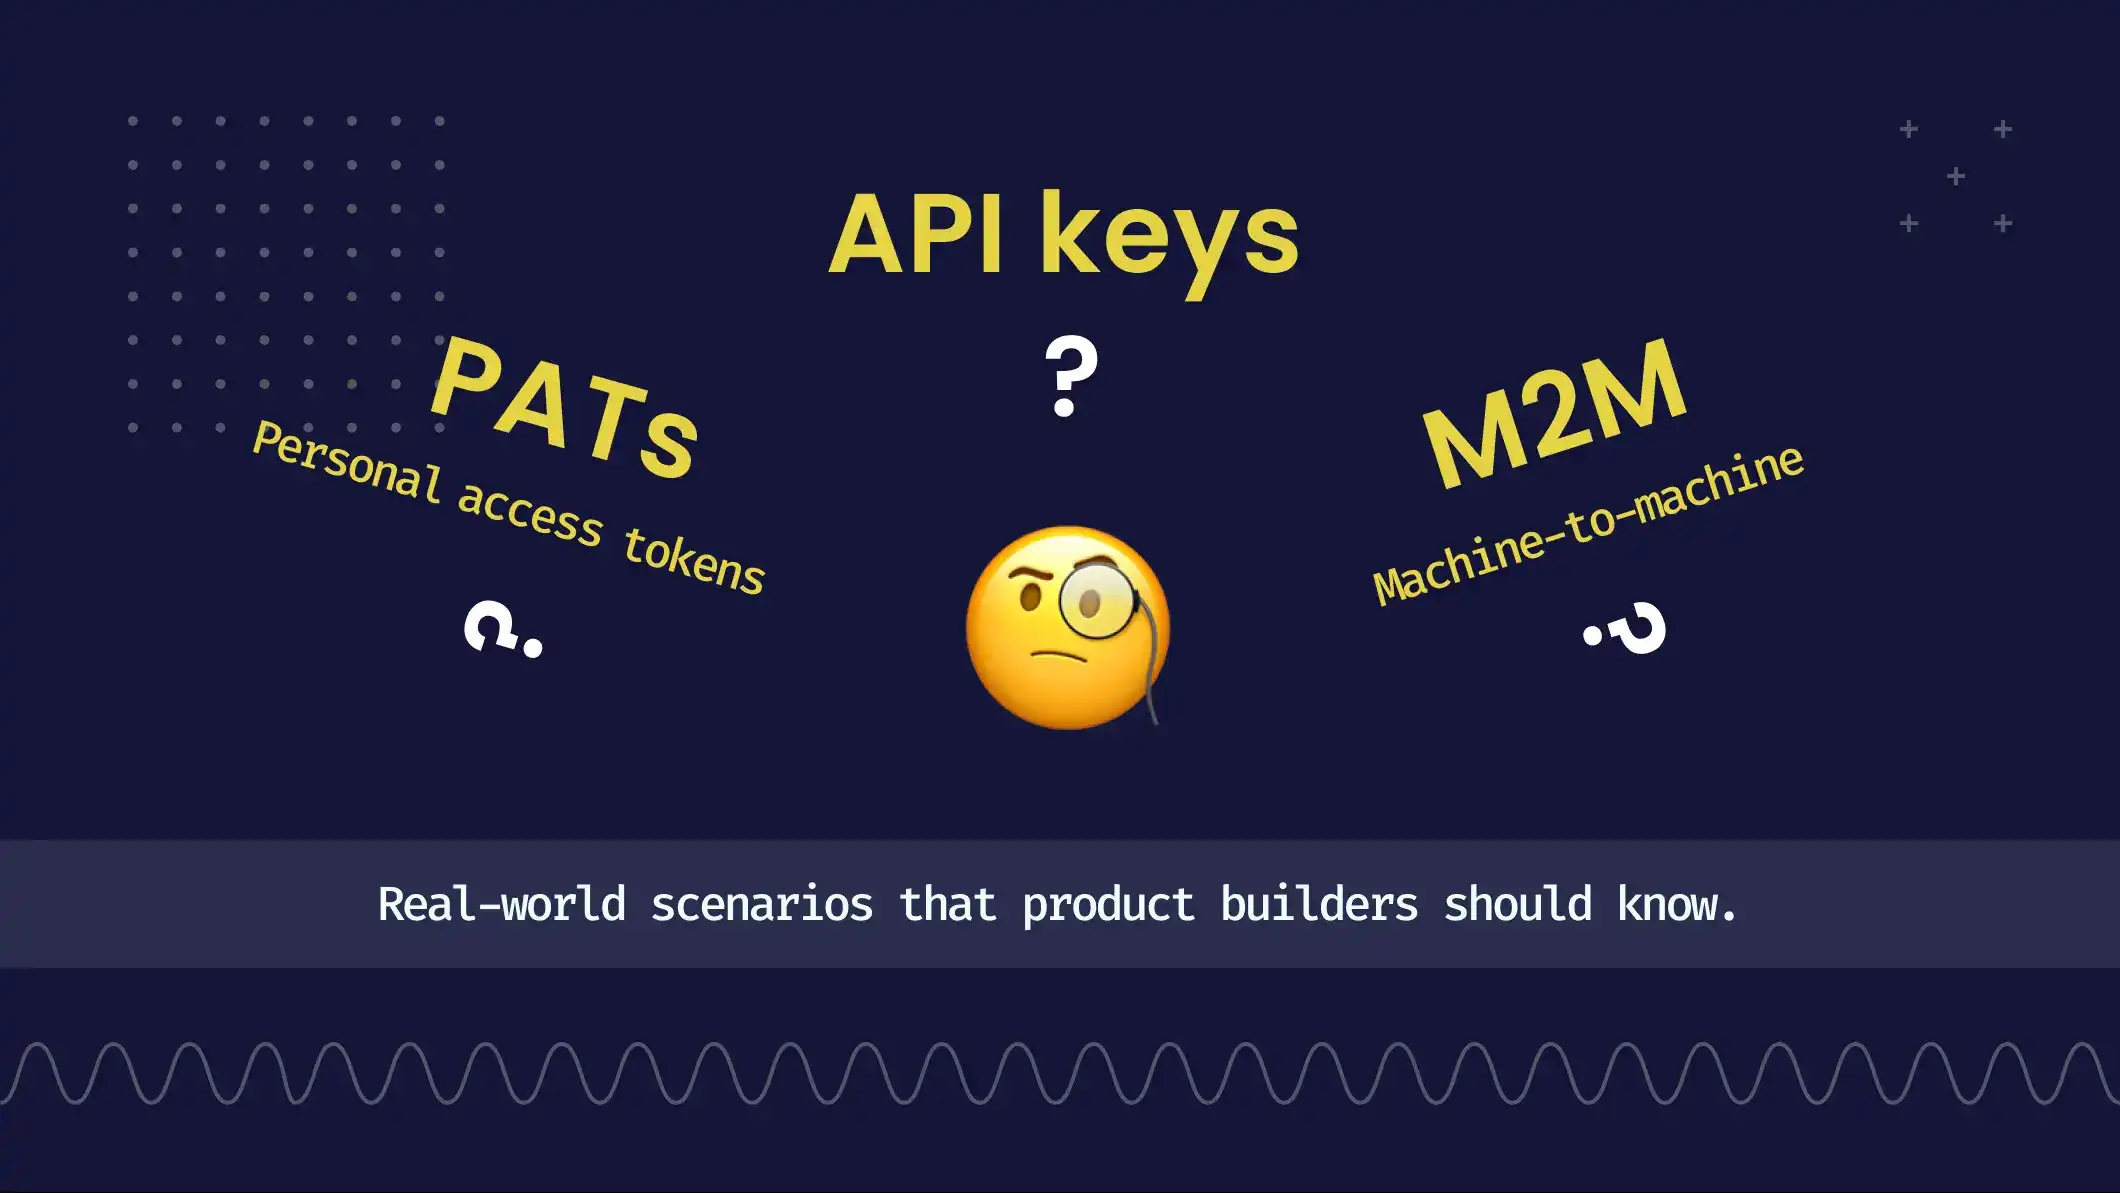 Personal access tokens, machine-to-machine authentication, and API Keys definition and their real-world scenarios